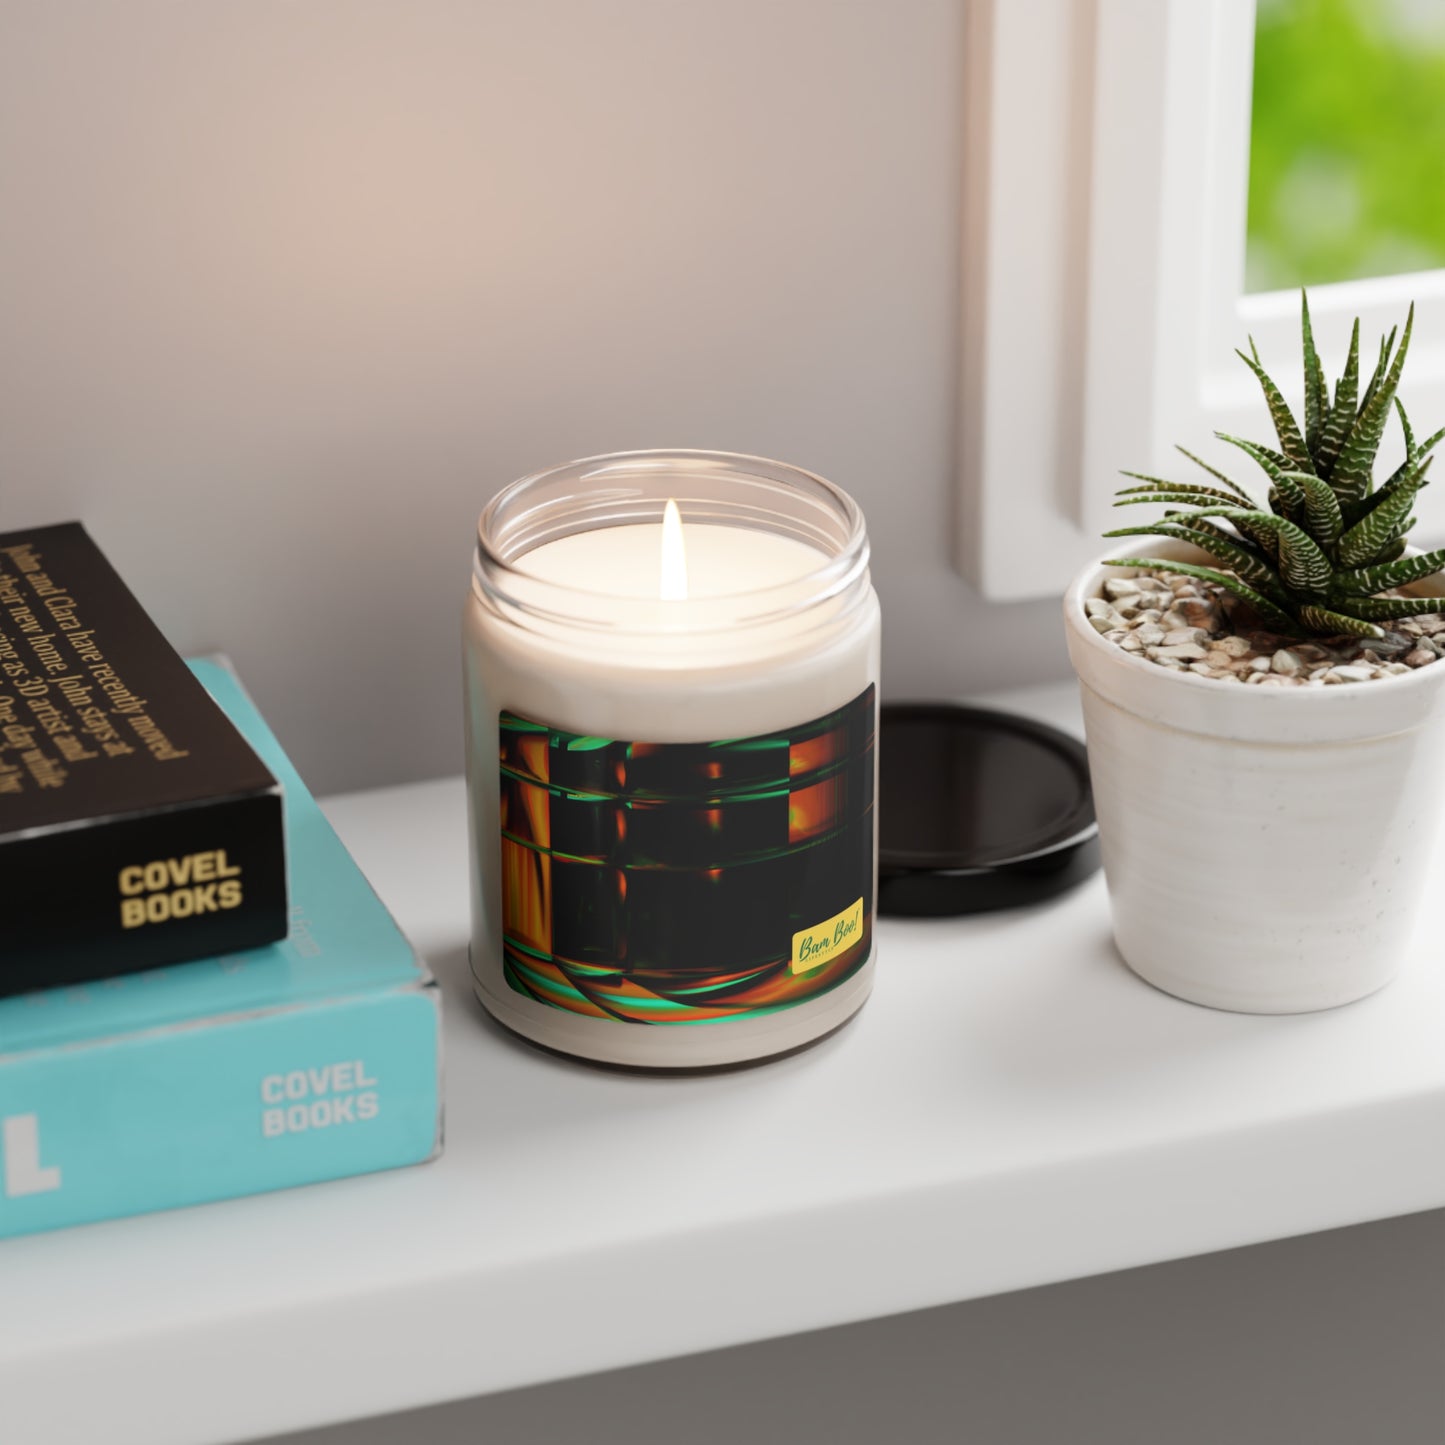 "Luminescent Texture" - Bam Boo! Lifestyle Eco-friendly Soy Candle